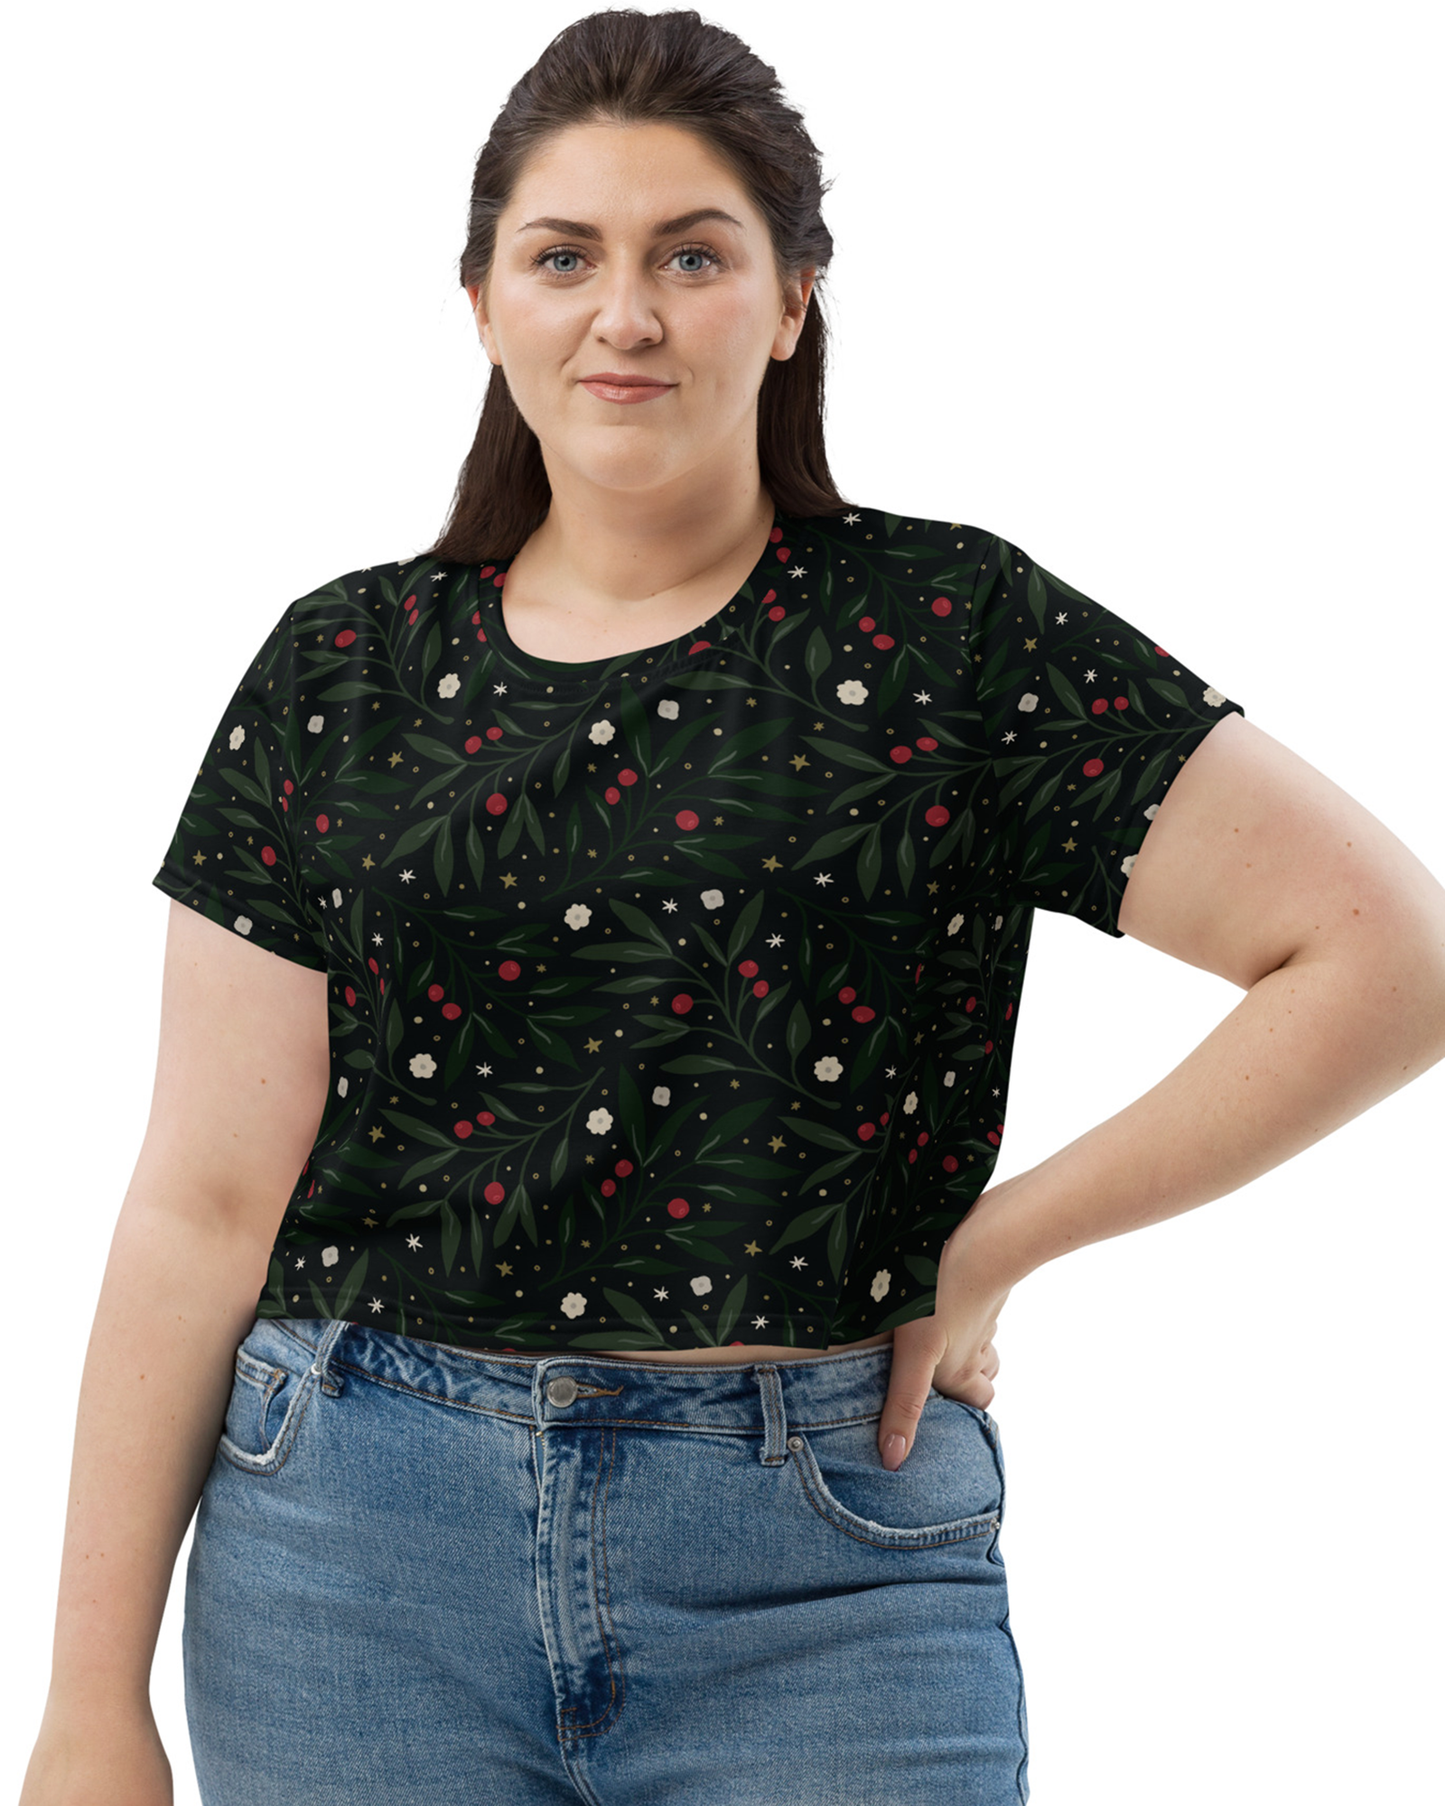 Nocturnal Holly Crop Tee